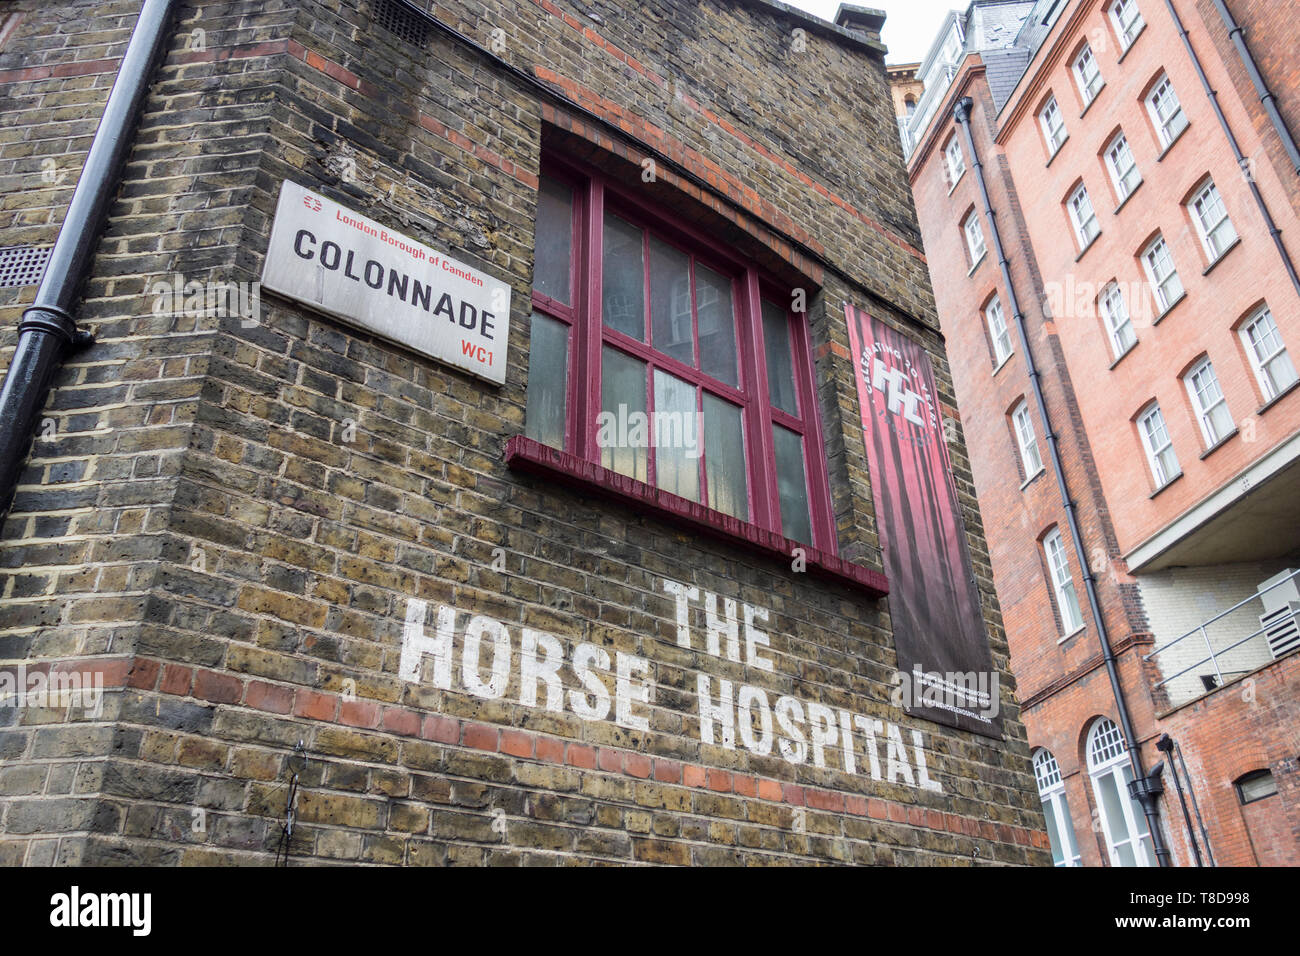 The Horse Hospital independent arts venue, The Colonnade, Camden, London, UK Stock Photo